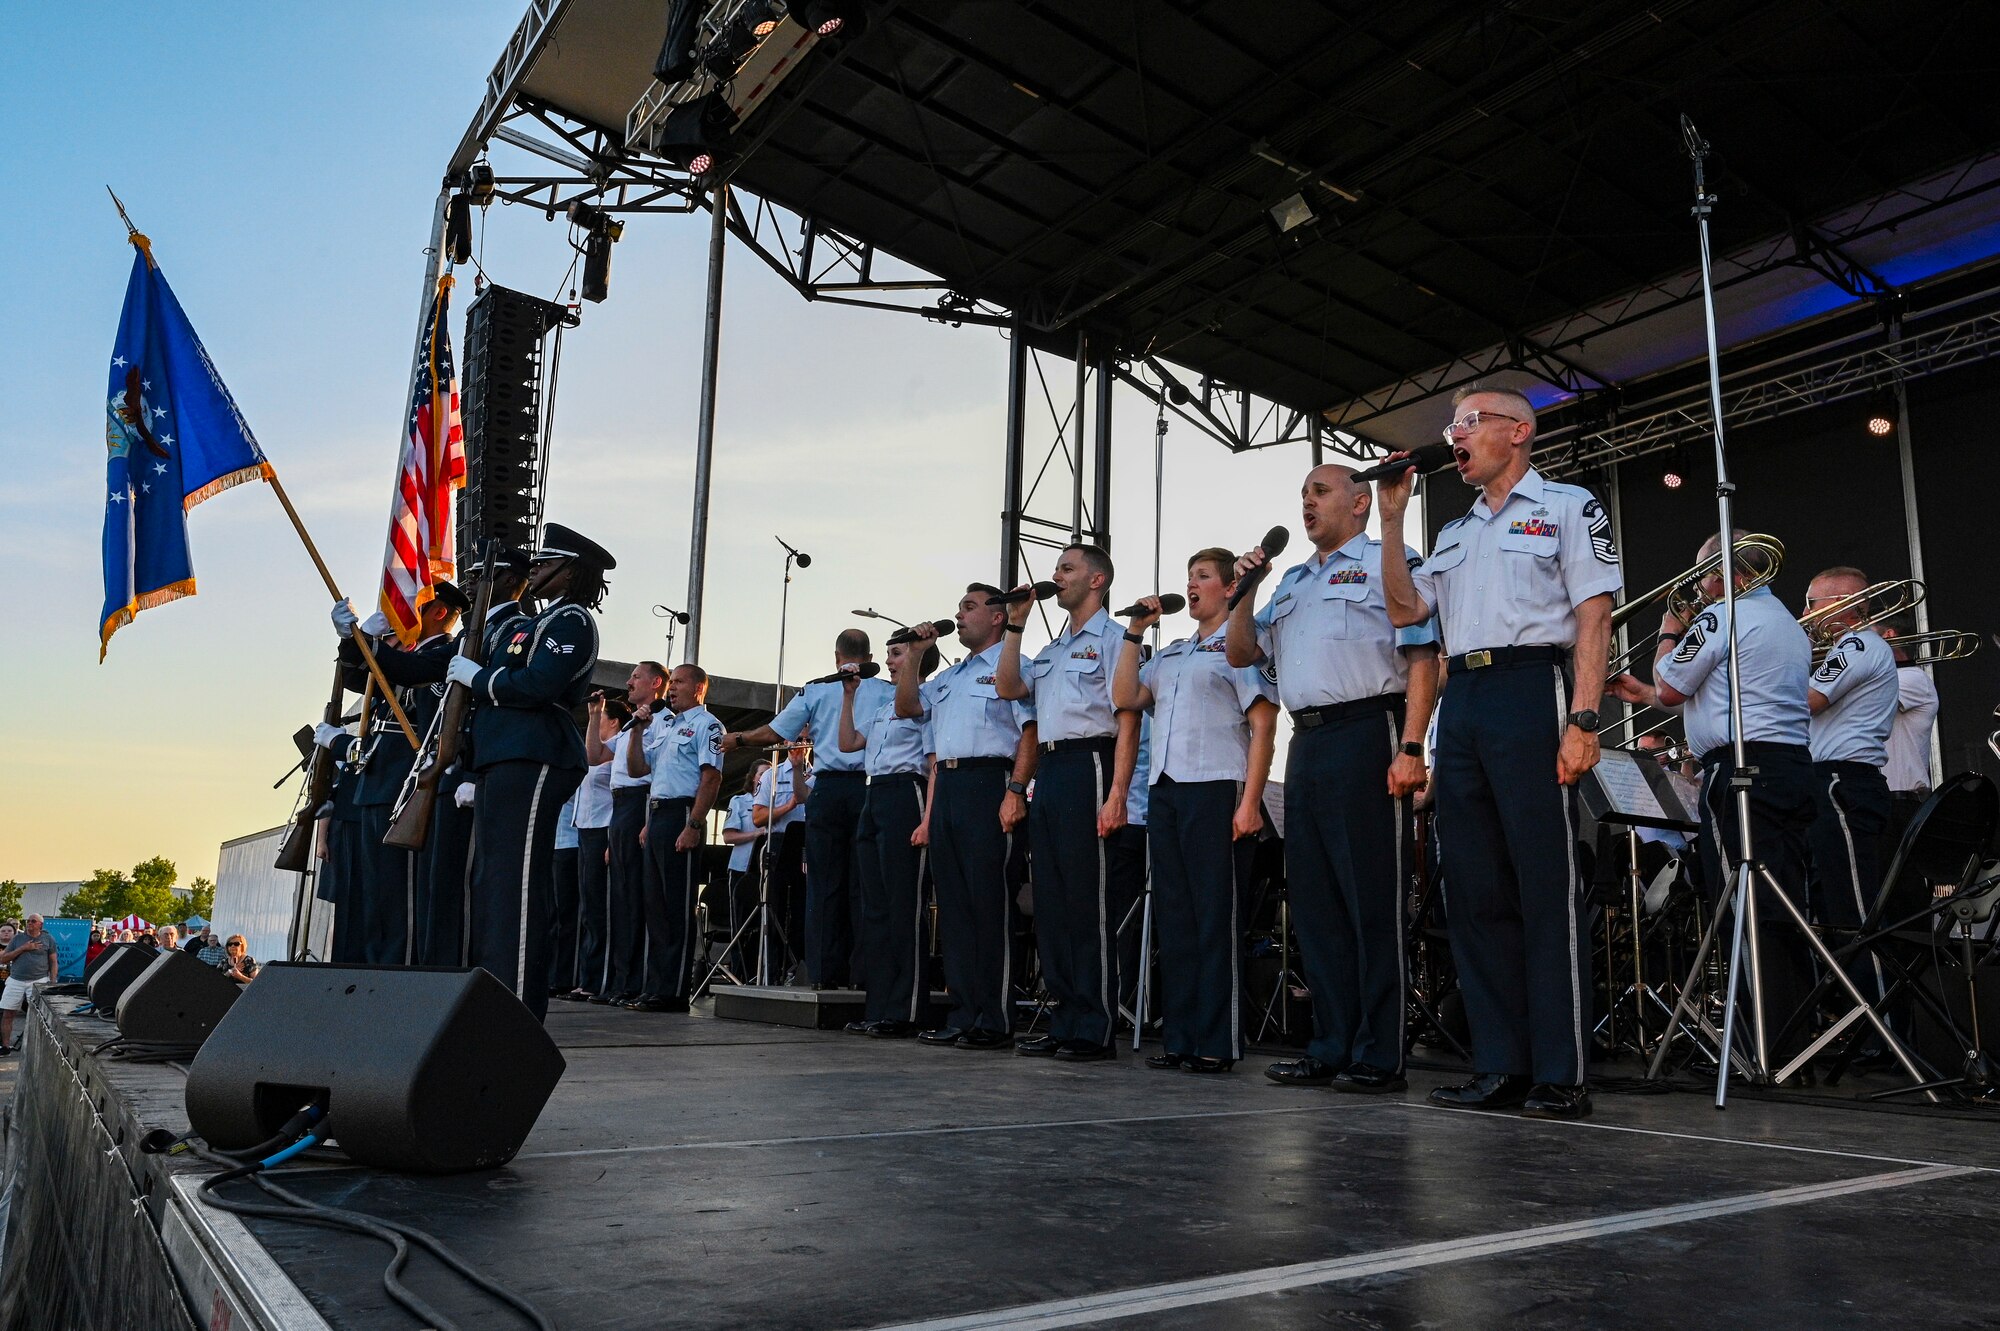 The Singing Sergeants, the official chorus of The United States Air Force Band, sing the National Anthem during a tour at Mt. Vernon, Ill., July 4, 2022. Formed initially as a men's chorus in 1945 from the rank and file of The U.S. Army Air Forces Band, the Singing Sergeants became the first premier military chorus to enlist women in 1973, diversifying their mission and increasing their scope of musical versatility. (U.S. Air Force photo by Airman Bill Guilliam)